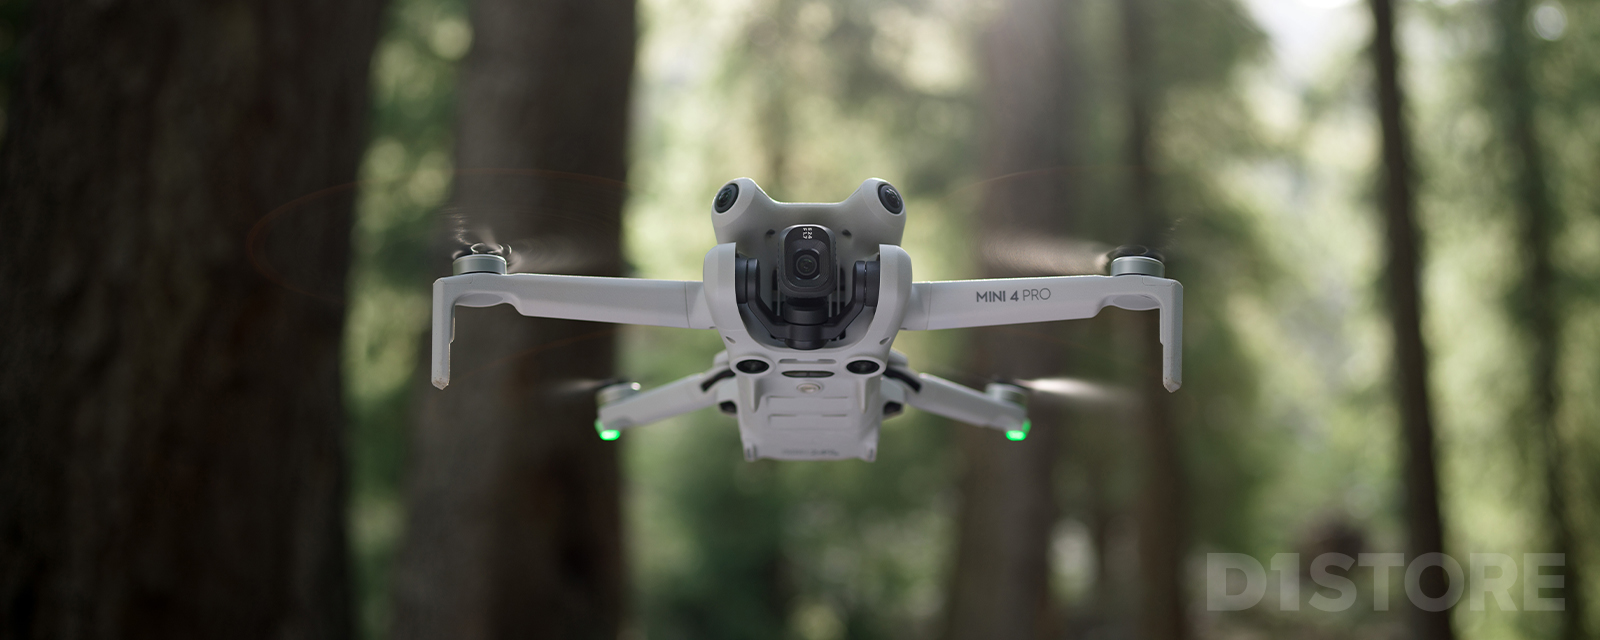 DJI Mini 4 Pro drone in forest with camera in portrait orientation for True Vertical Shooting